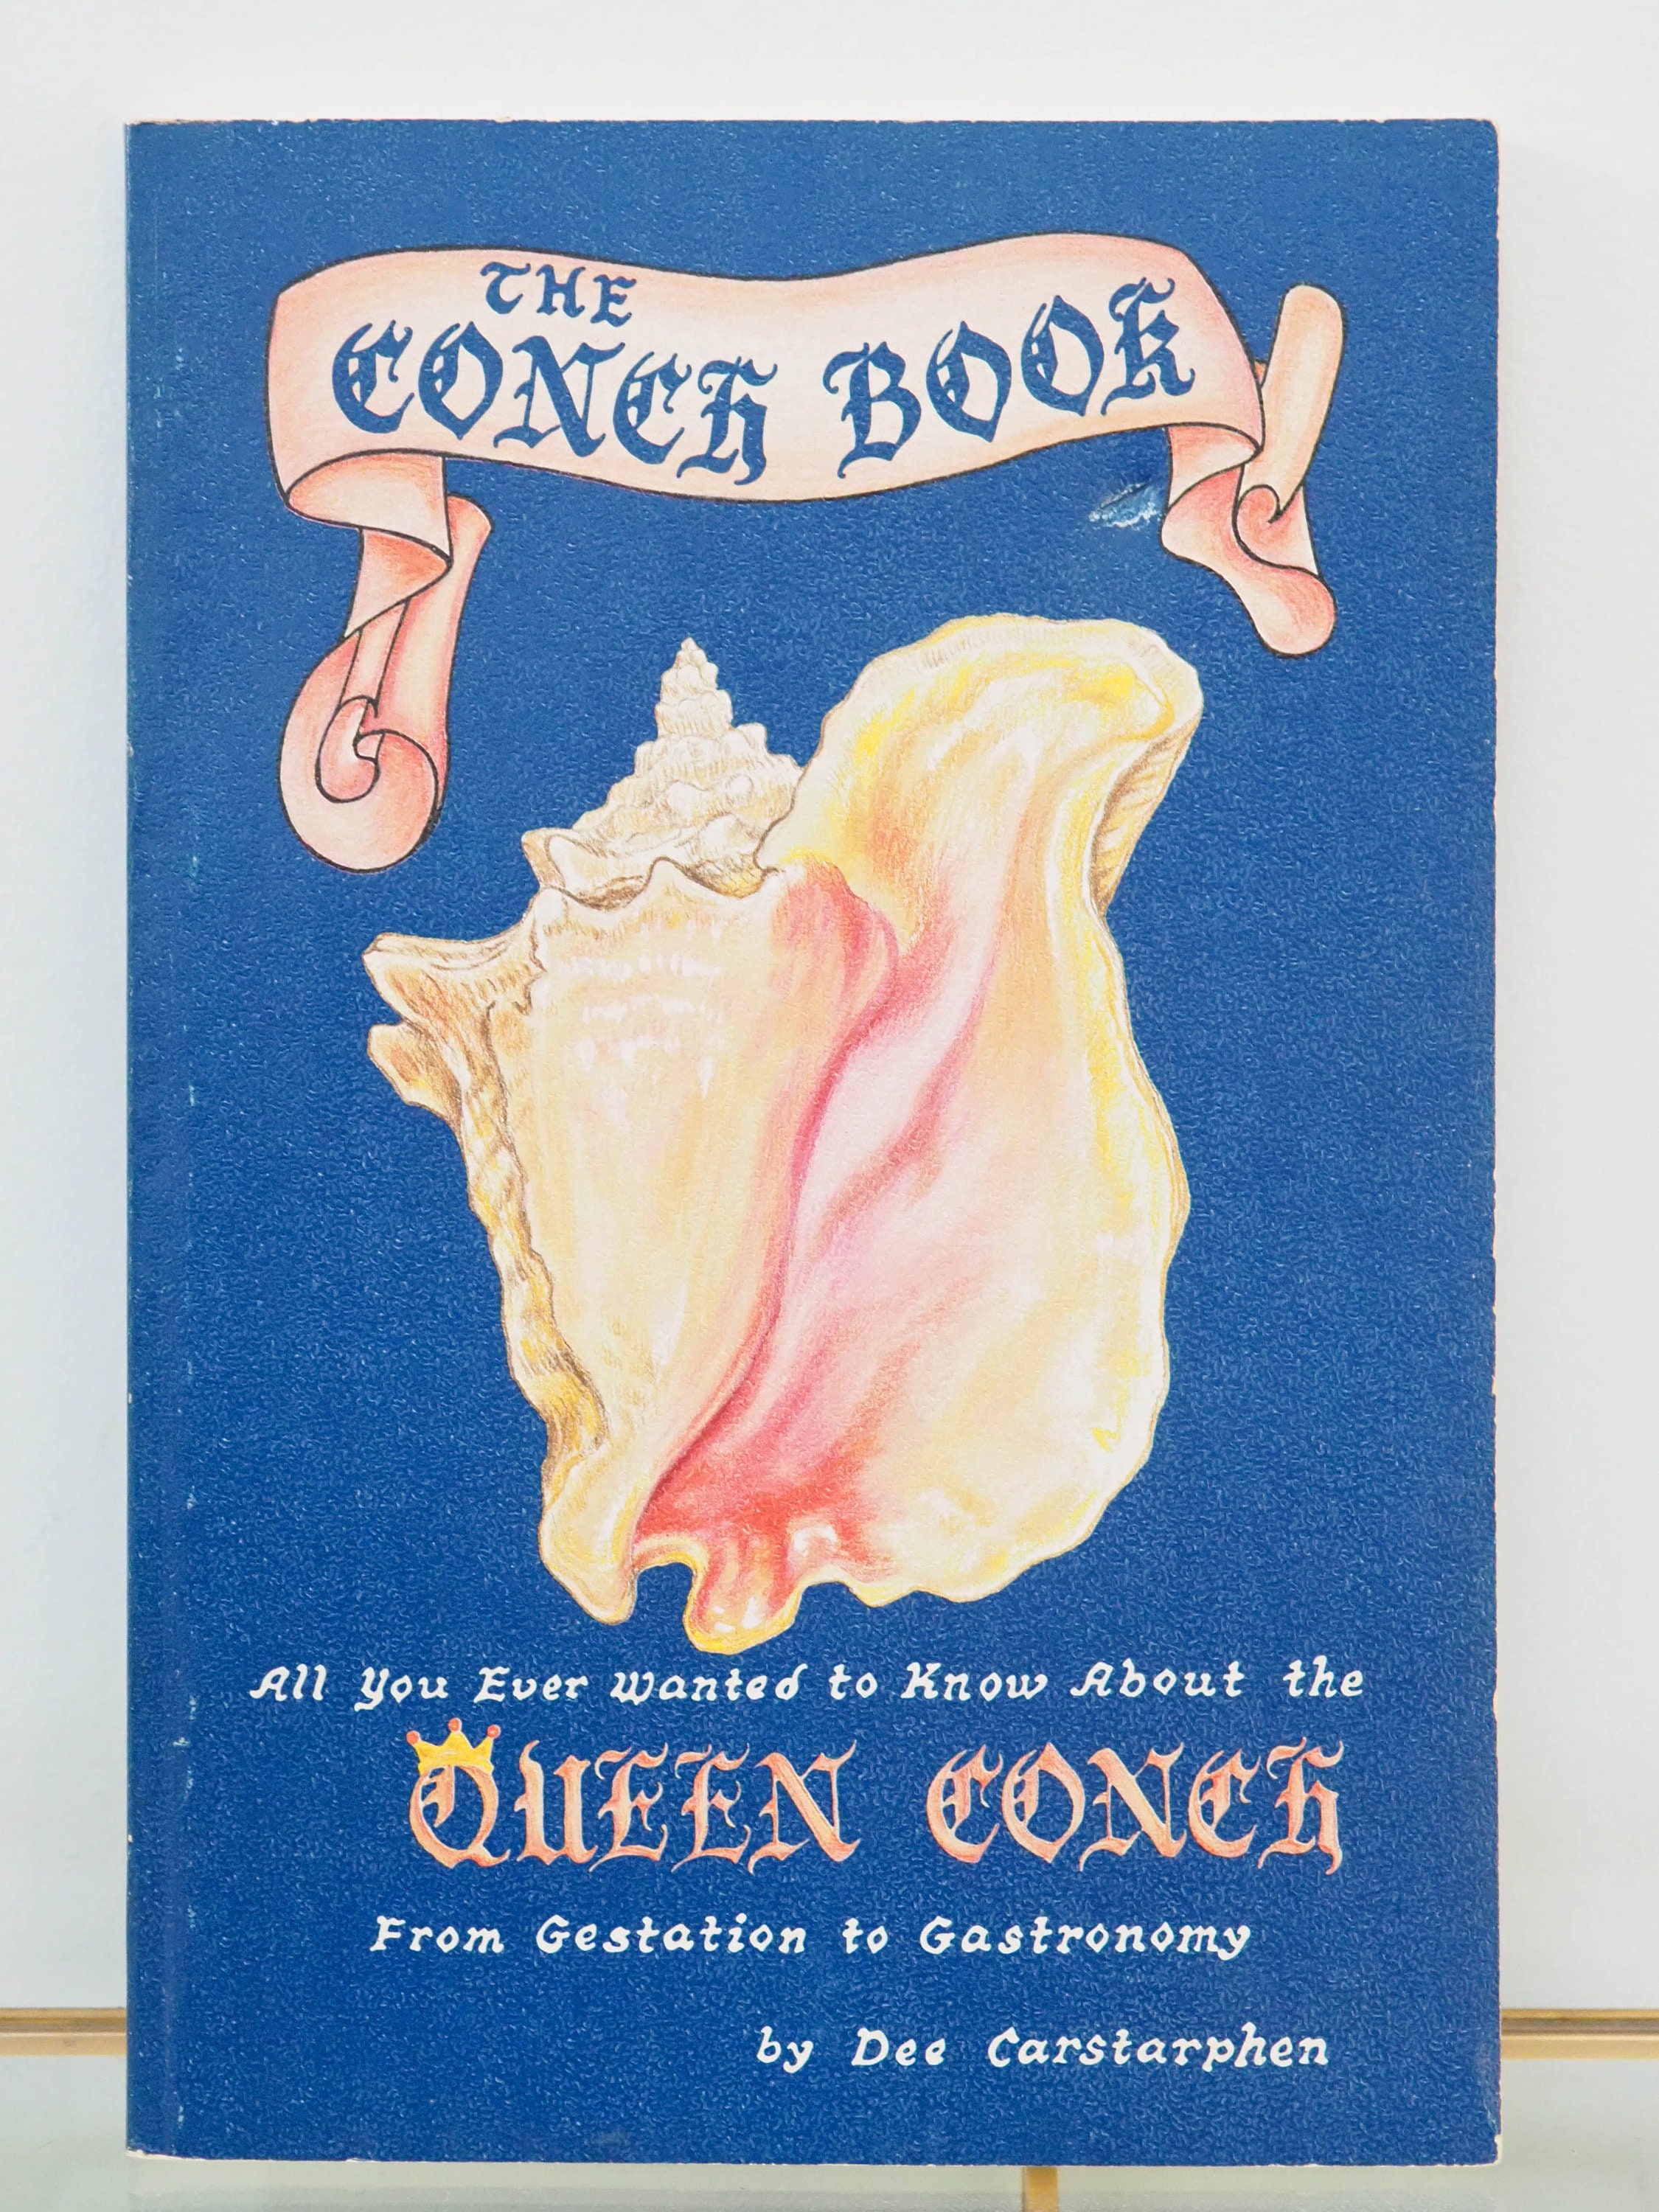 The Conch Book Dee Carstarphen 1982 Illustrated Queen pic image image